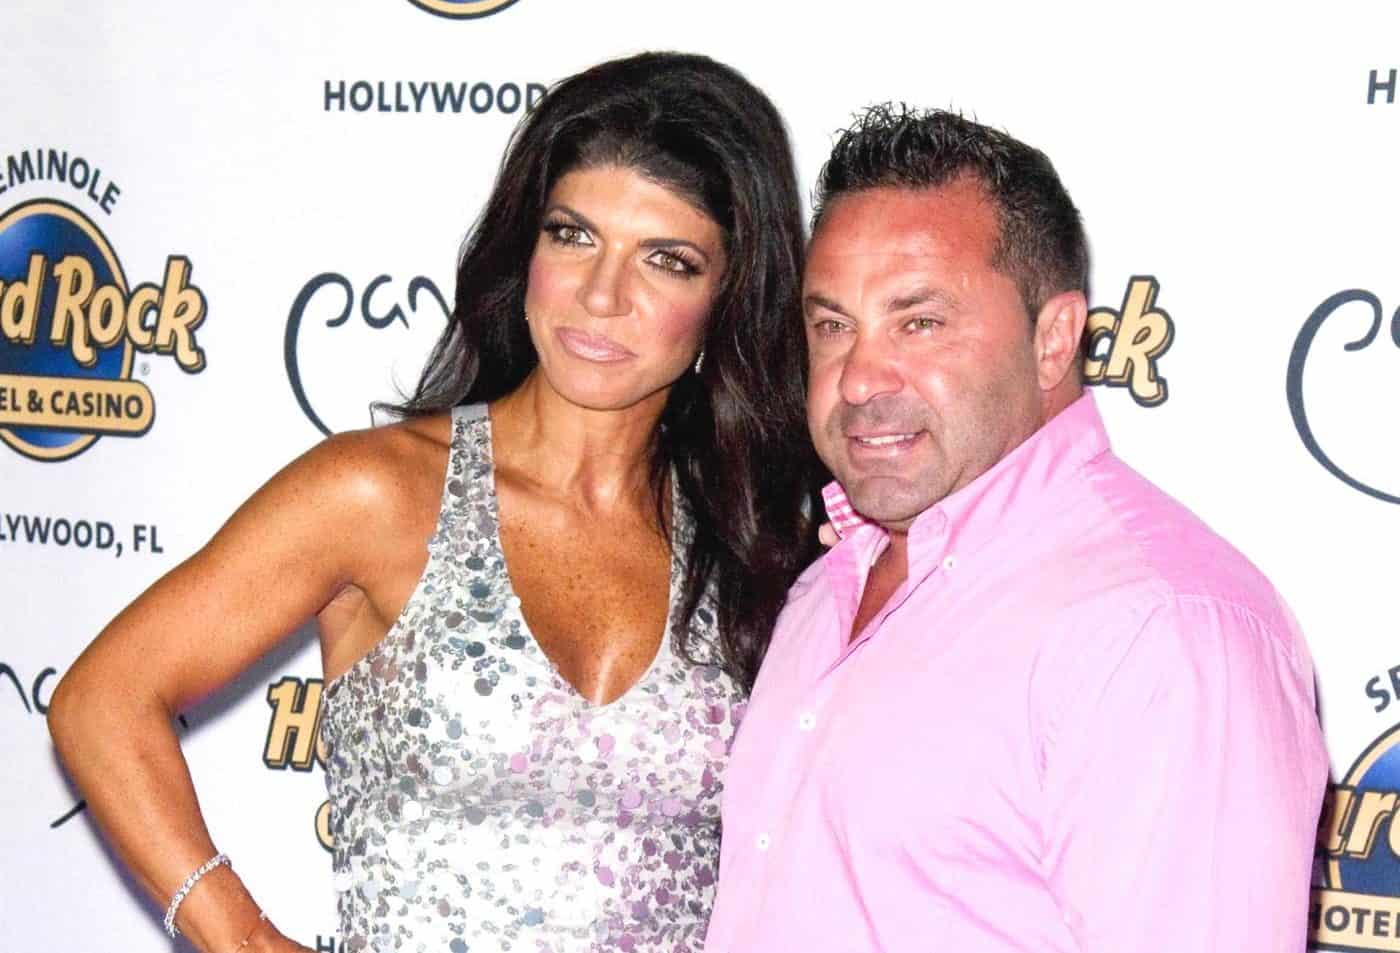 RHONJ's Joe Giudice Will Not Be Going Home After Prison Release In Two Weeks